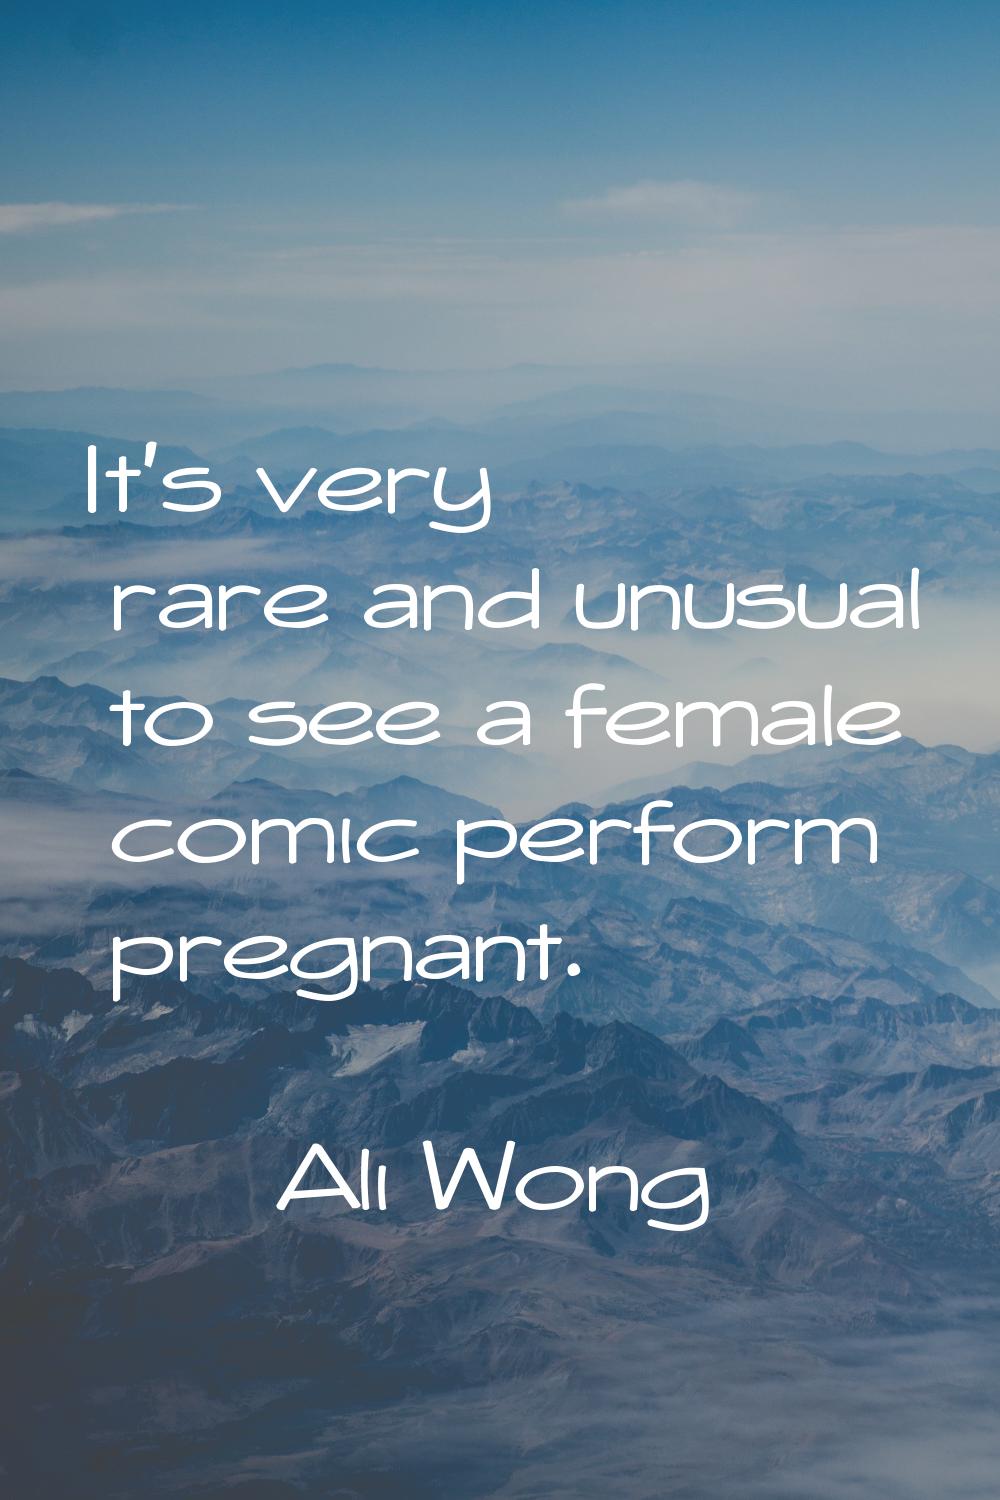 It's very rare and unusual to see a female comic perform pregnant.